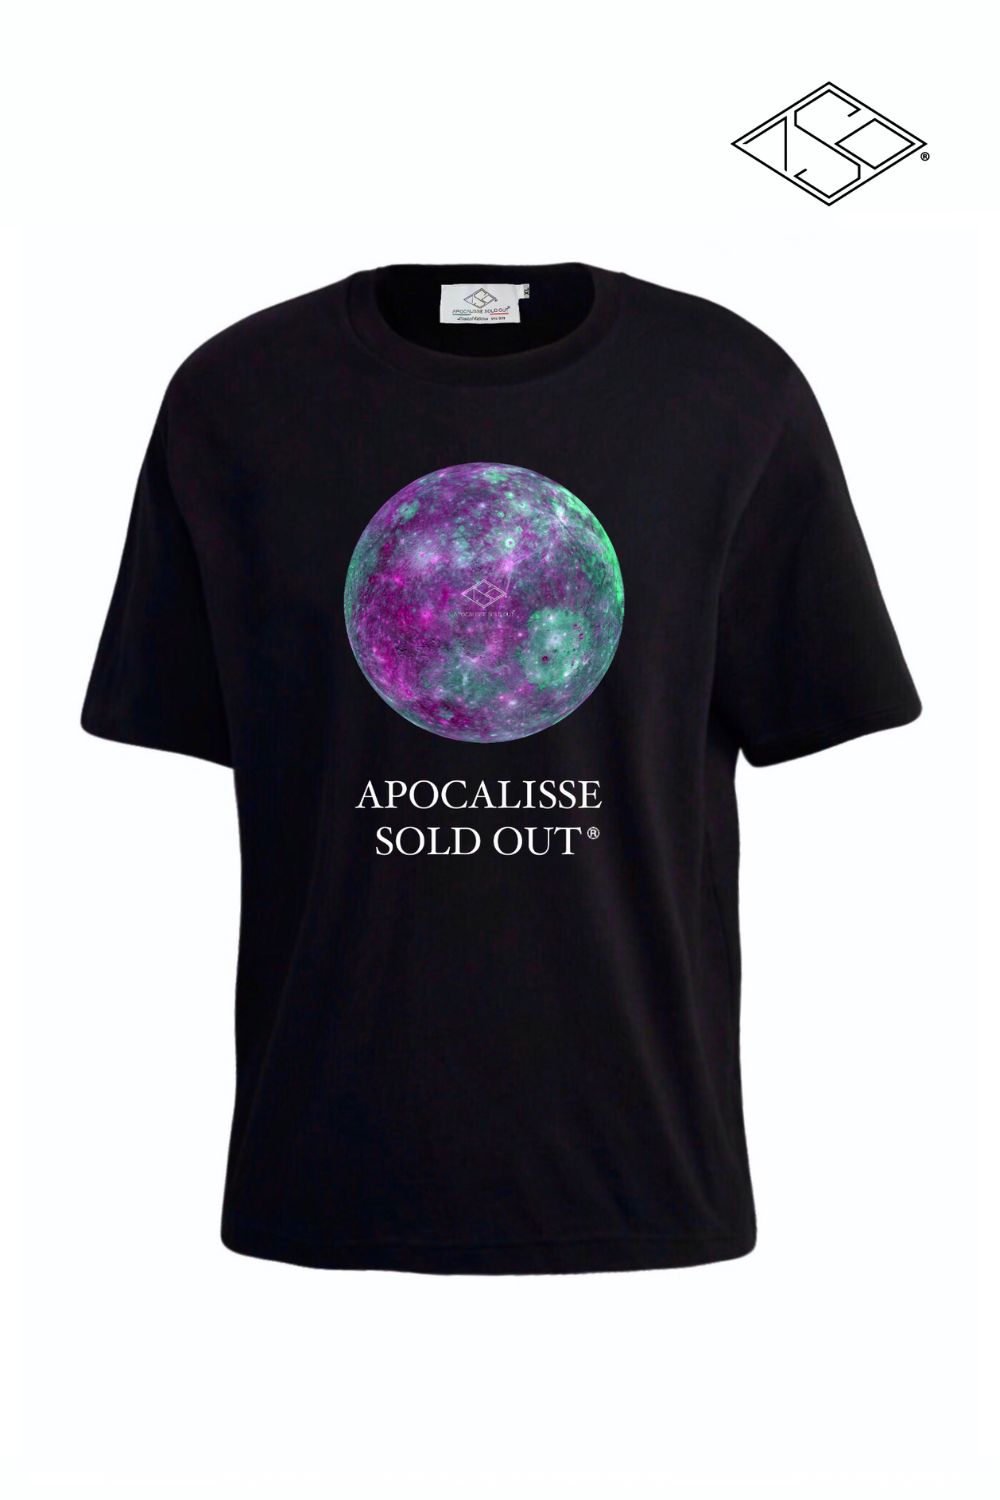 tshirt Apocalisse TOP PLANET by ApocalisseSoldOut® Fashion Brand